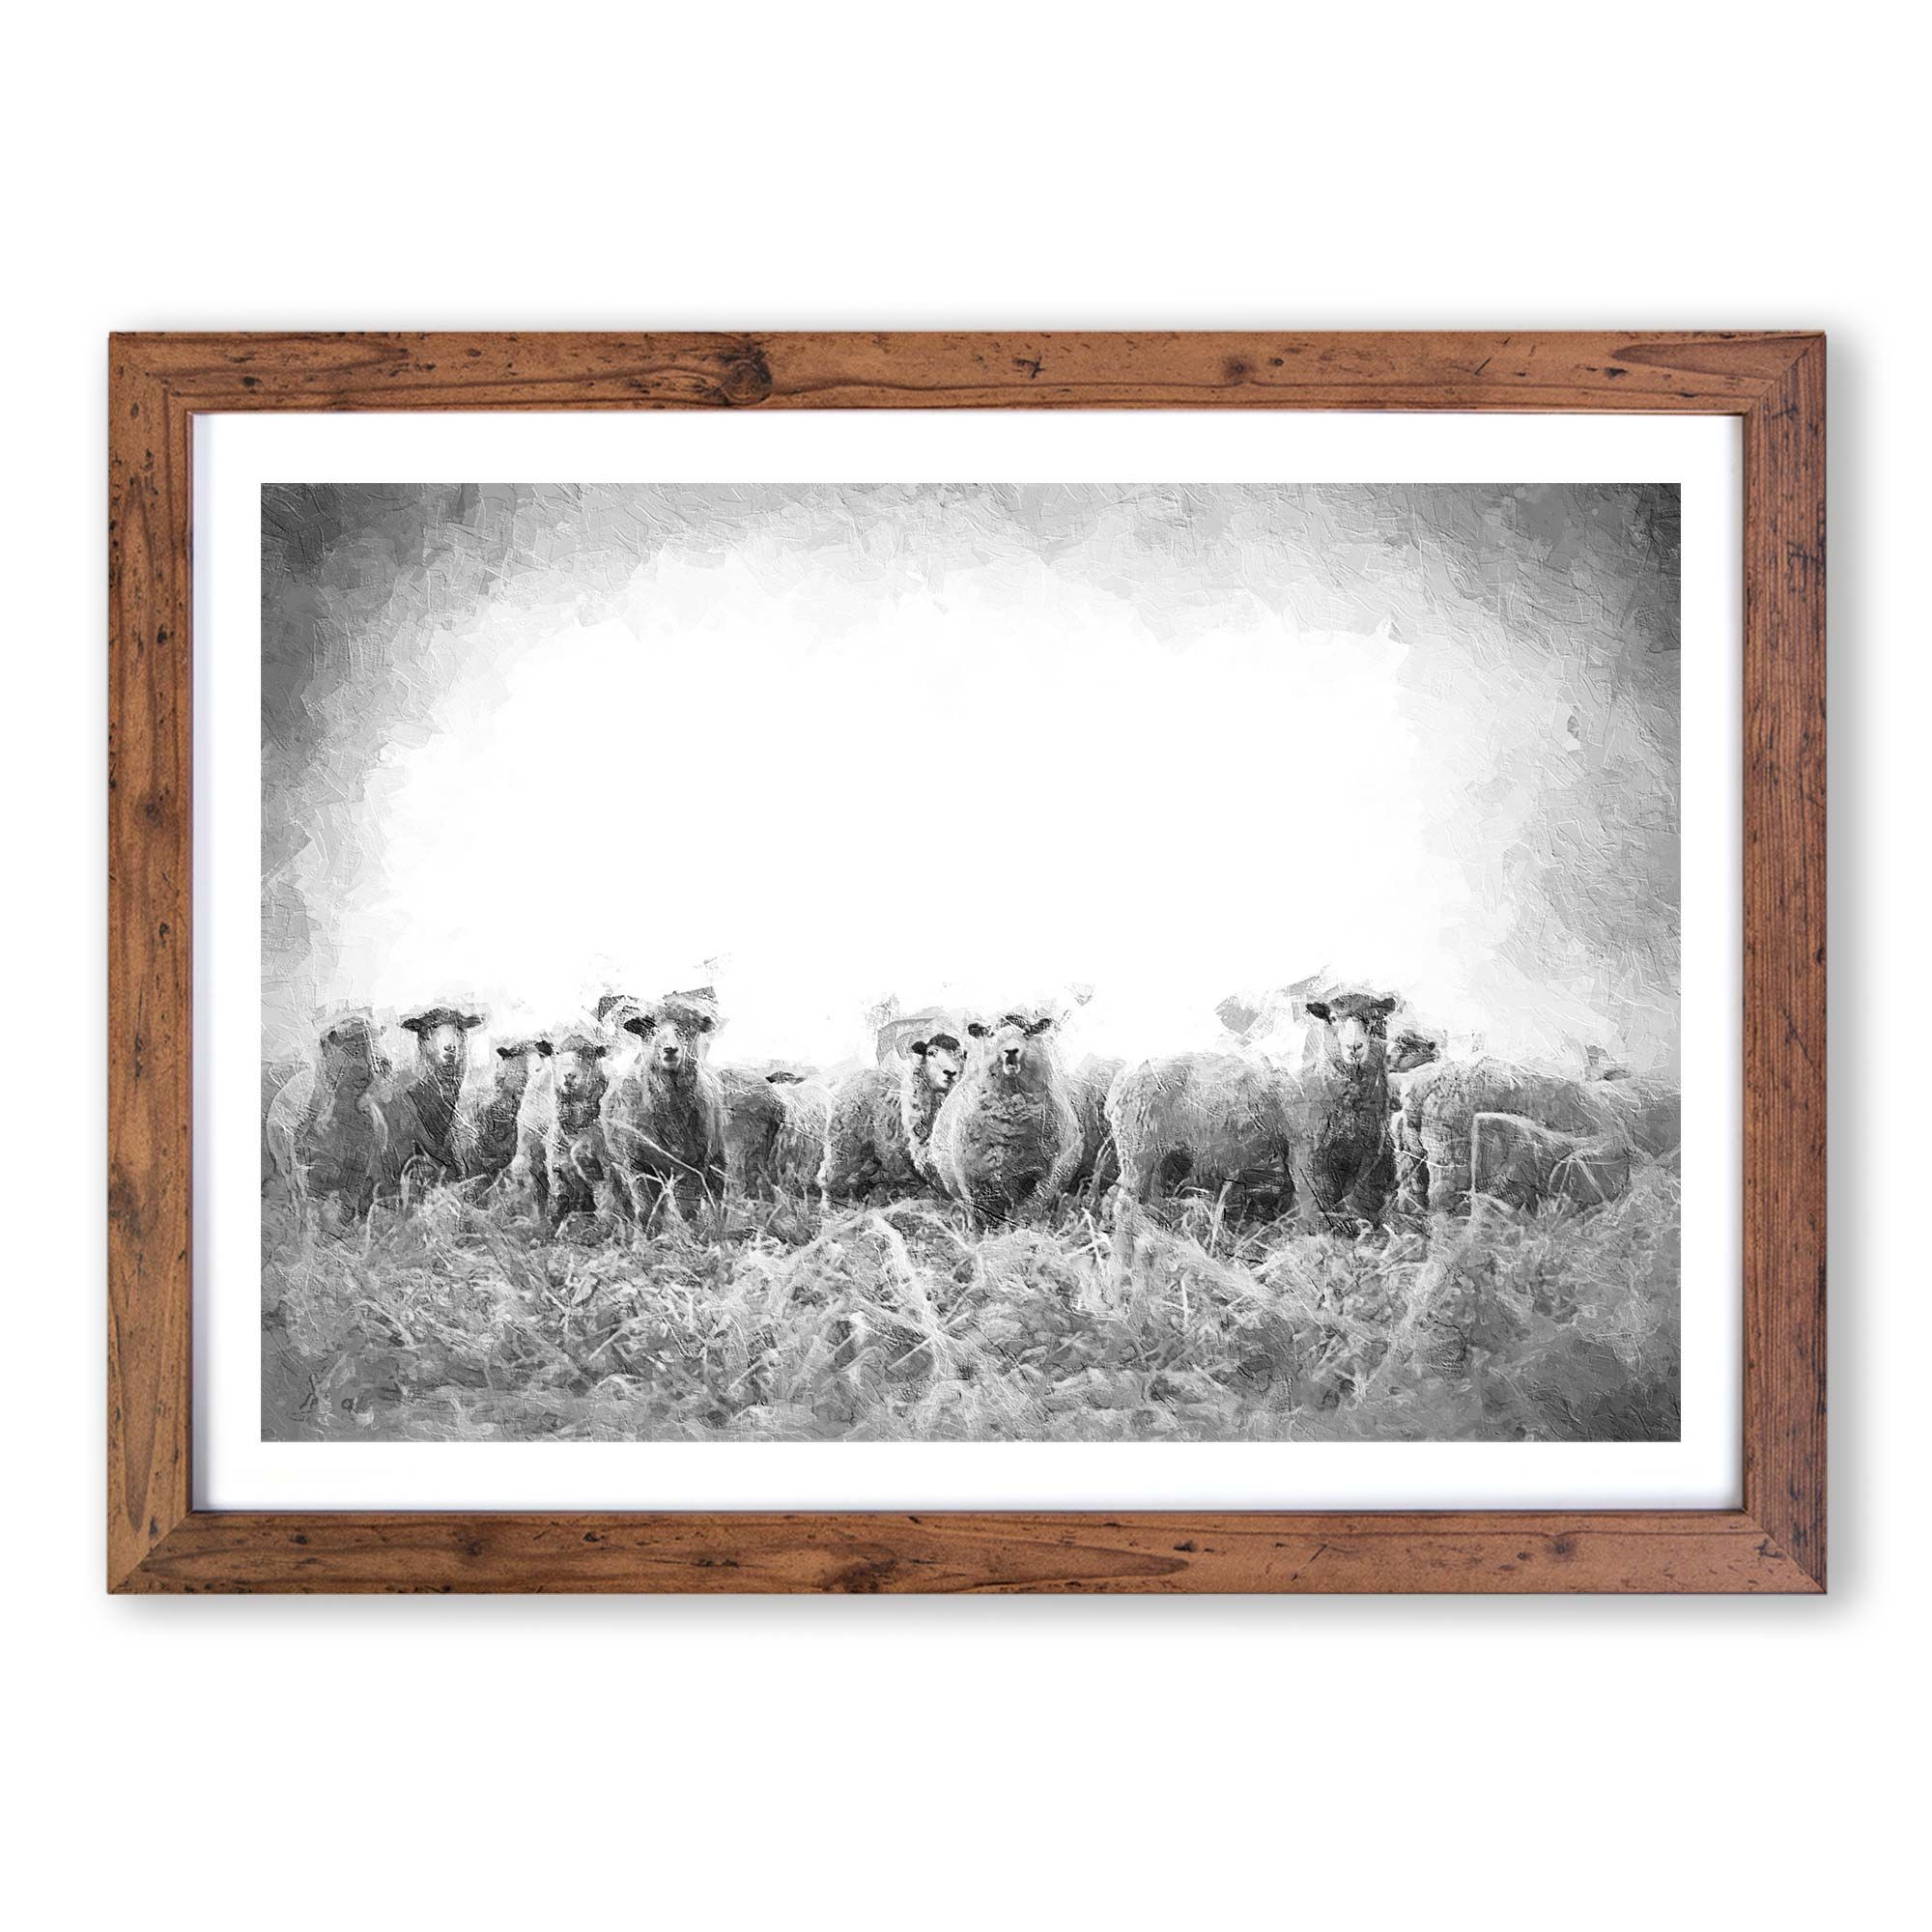 A Flock Of Sheep In Abstract Landscape Nature Wall Art Framed Picture Throughout Recent Flock Wall Art (View 15 of 20)